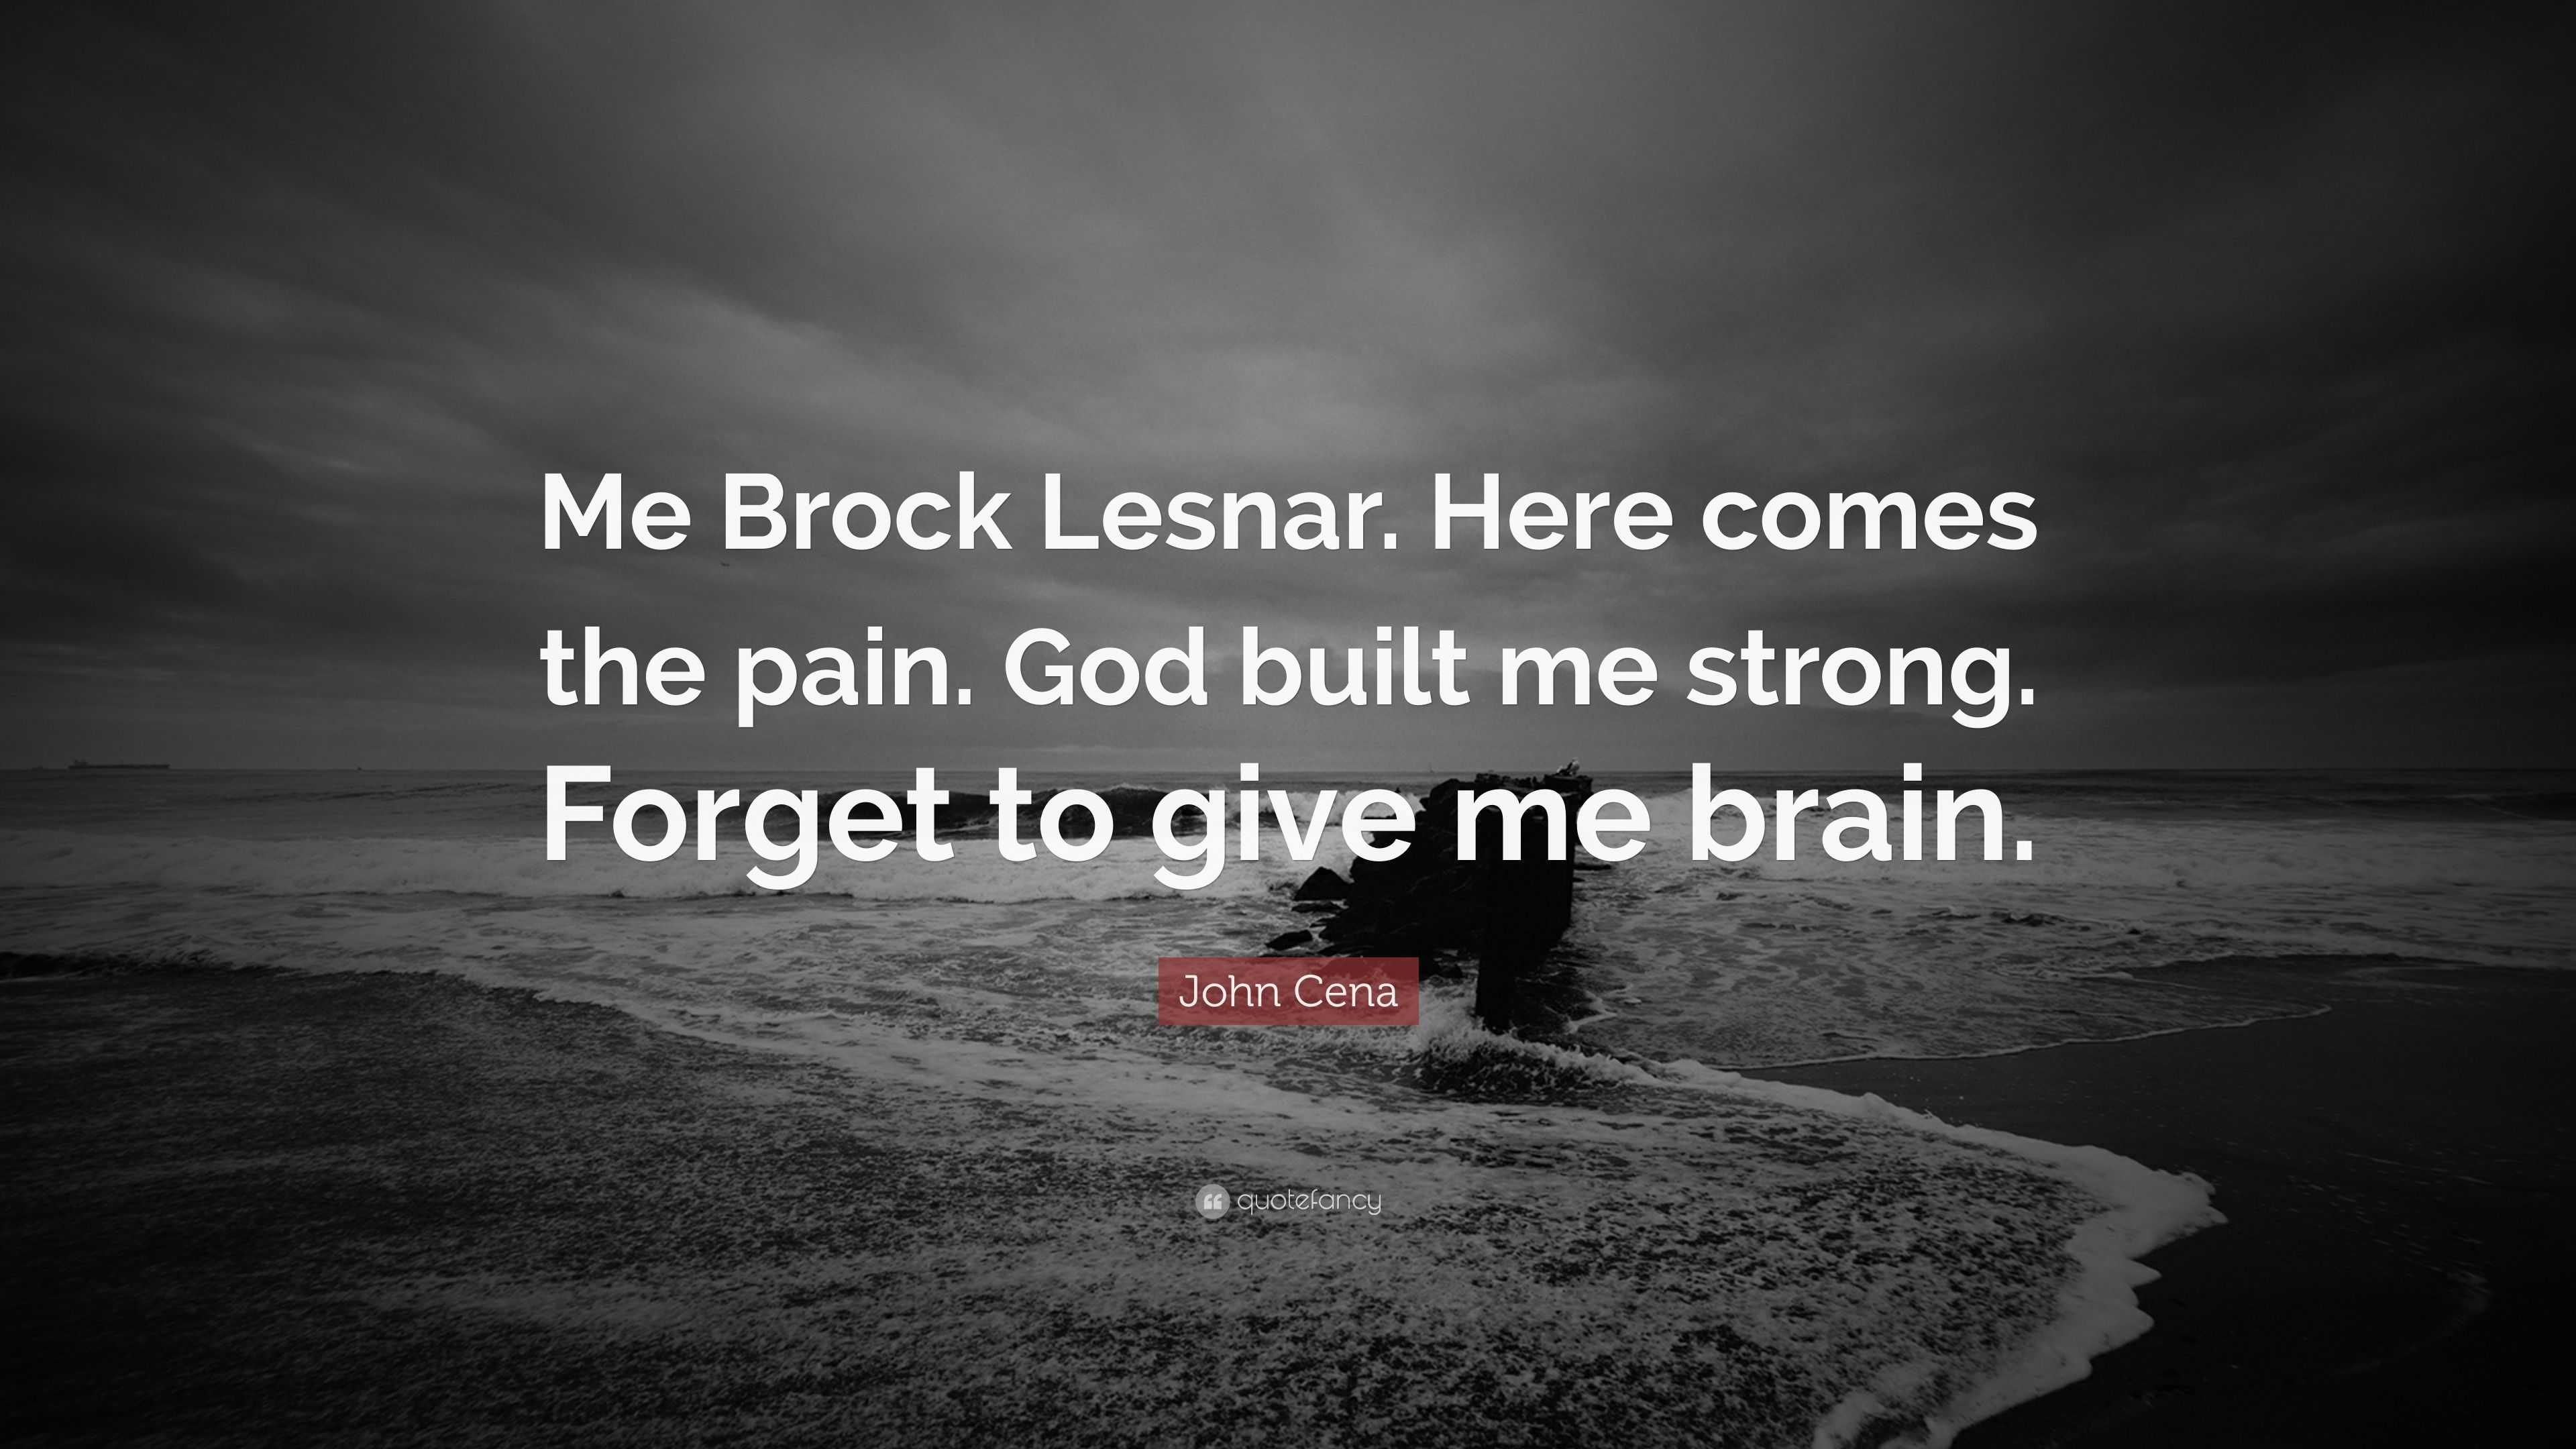 Brock Lesnar Quote - Brock Lesnar is not here to put smiles on people's